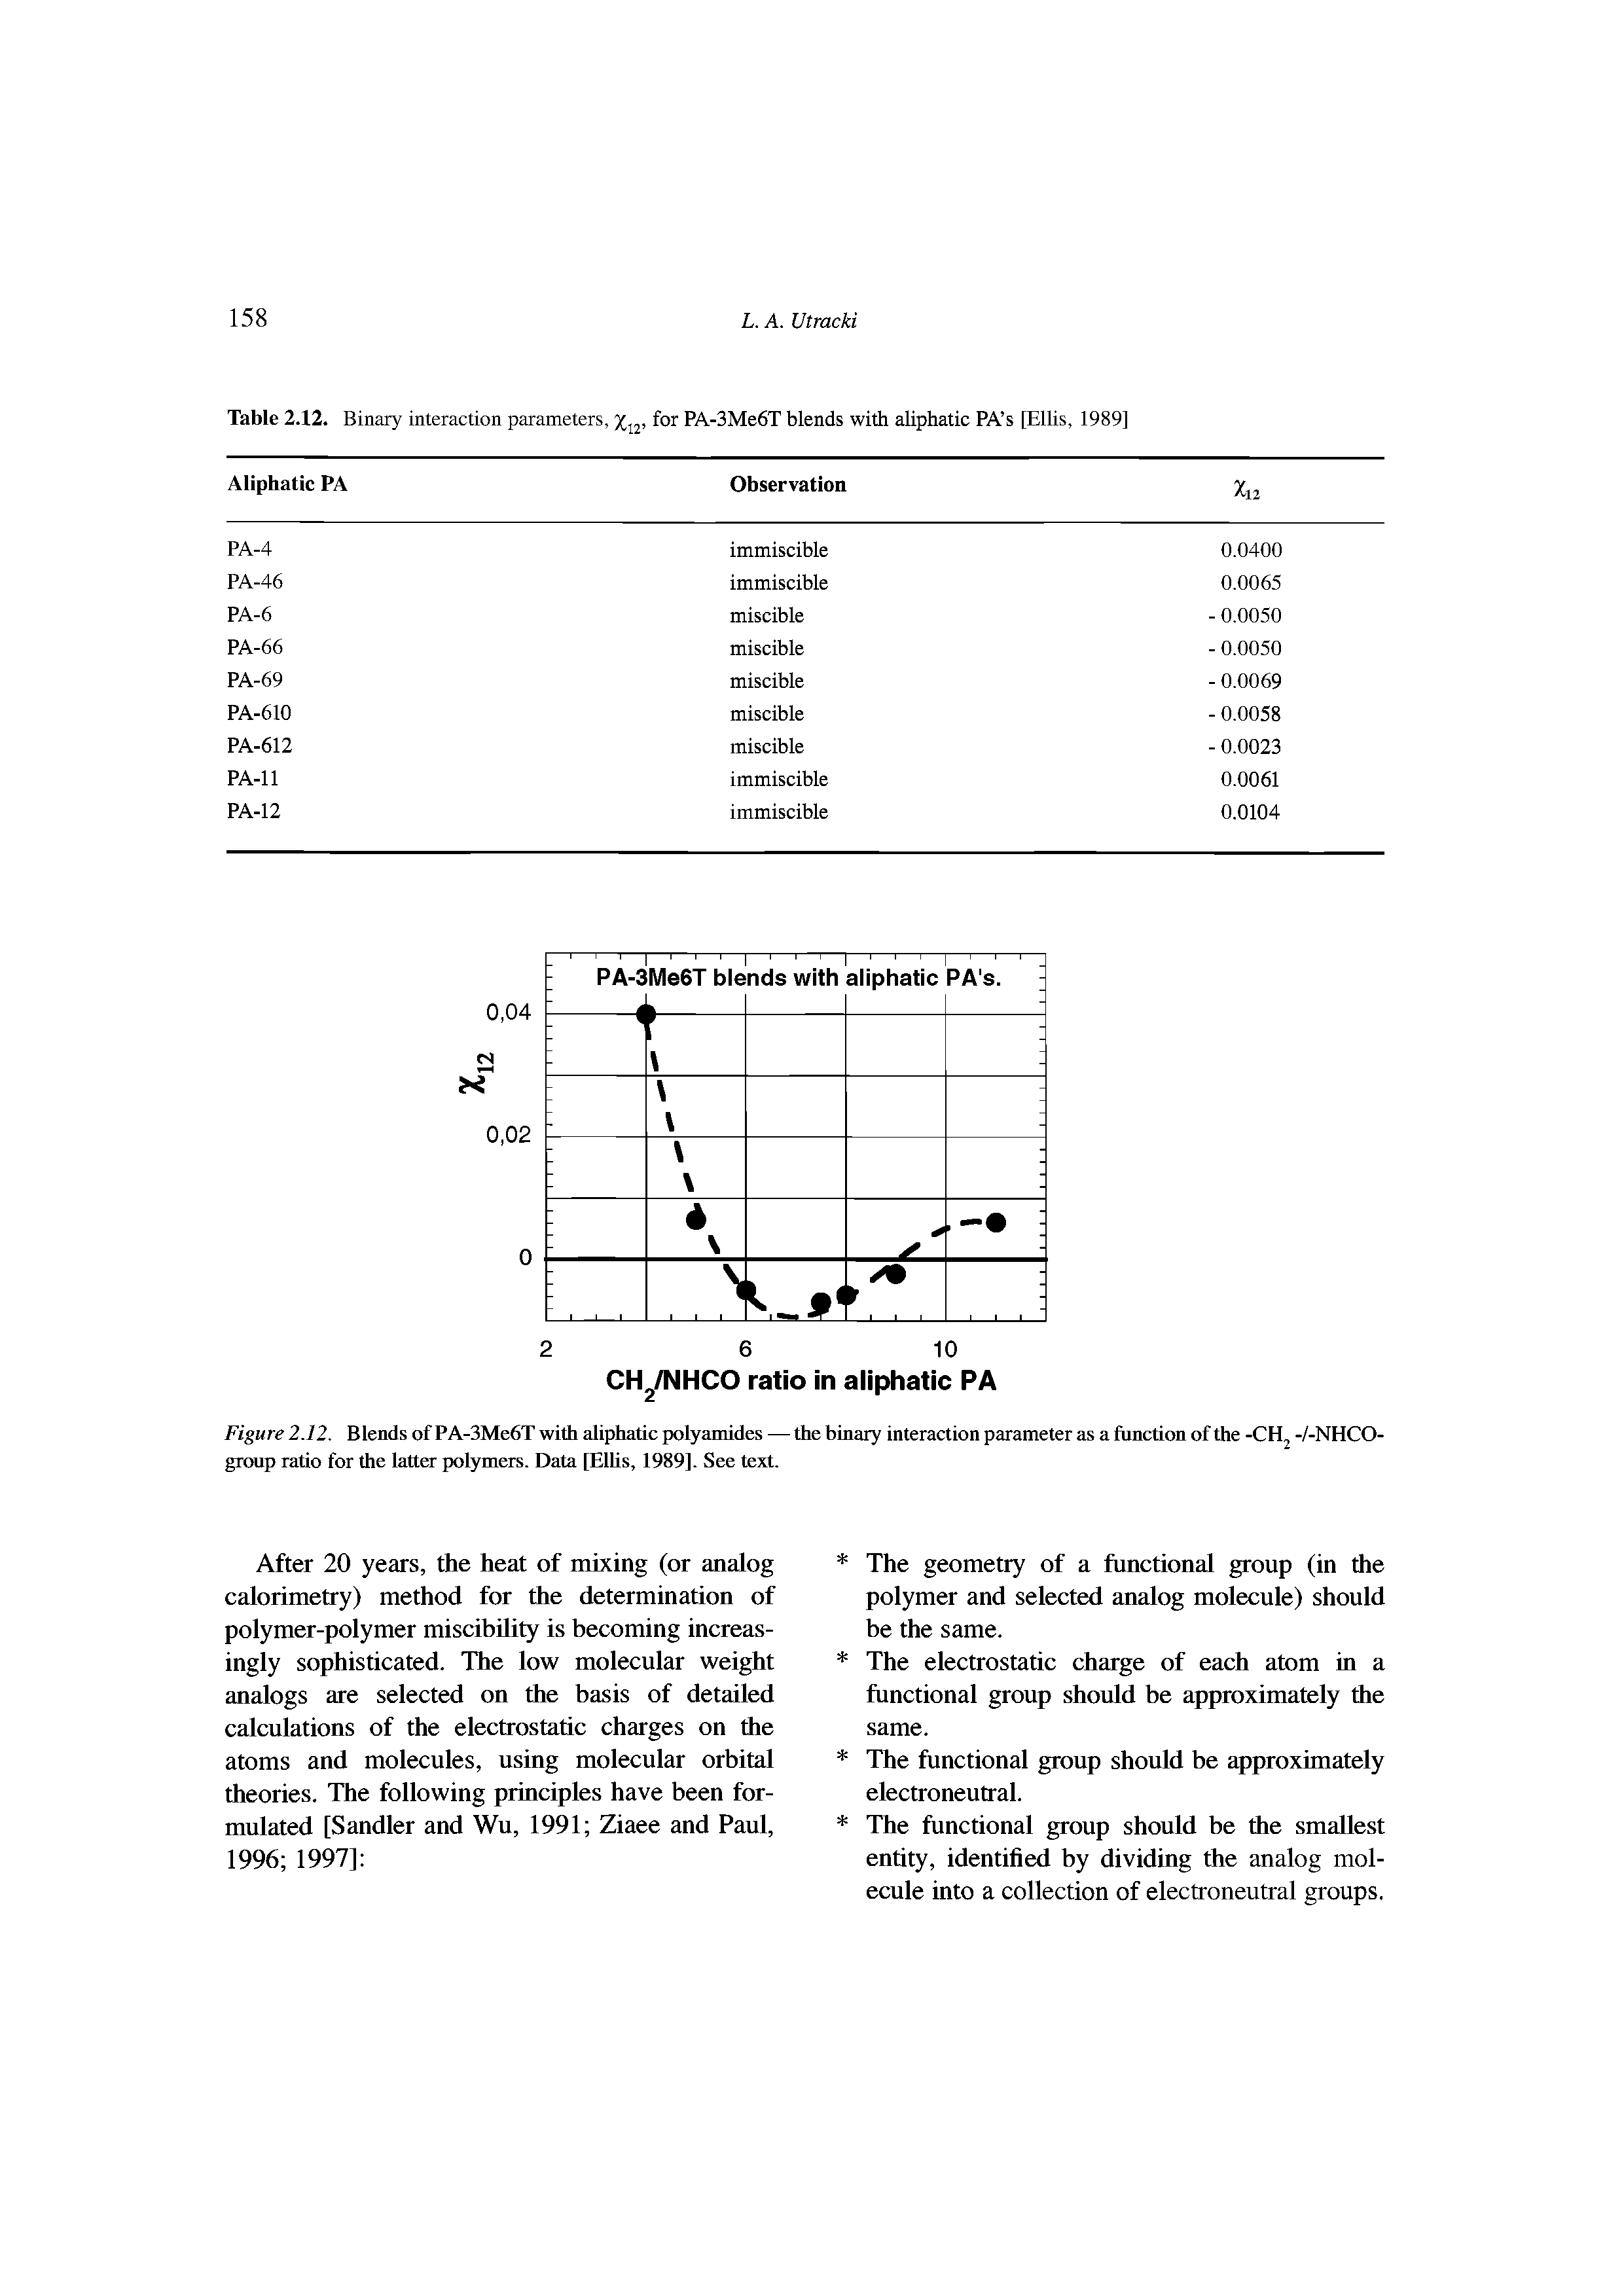 Figure 2.12. Blends of PA-3Me6T with aliphatic polyamides — the binary interaction parameter as a function of the -CH -Z-NHCO-group ratio for the latter polymers. Data [Elhs, 1989]. See text.